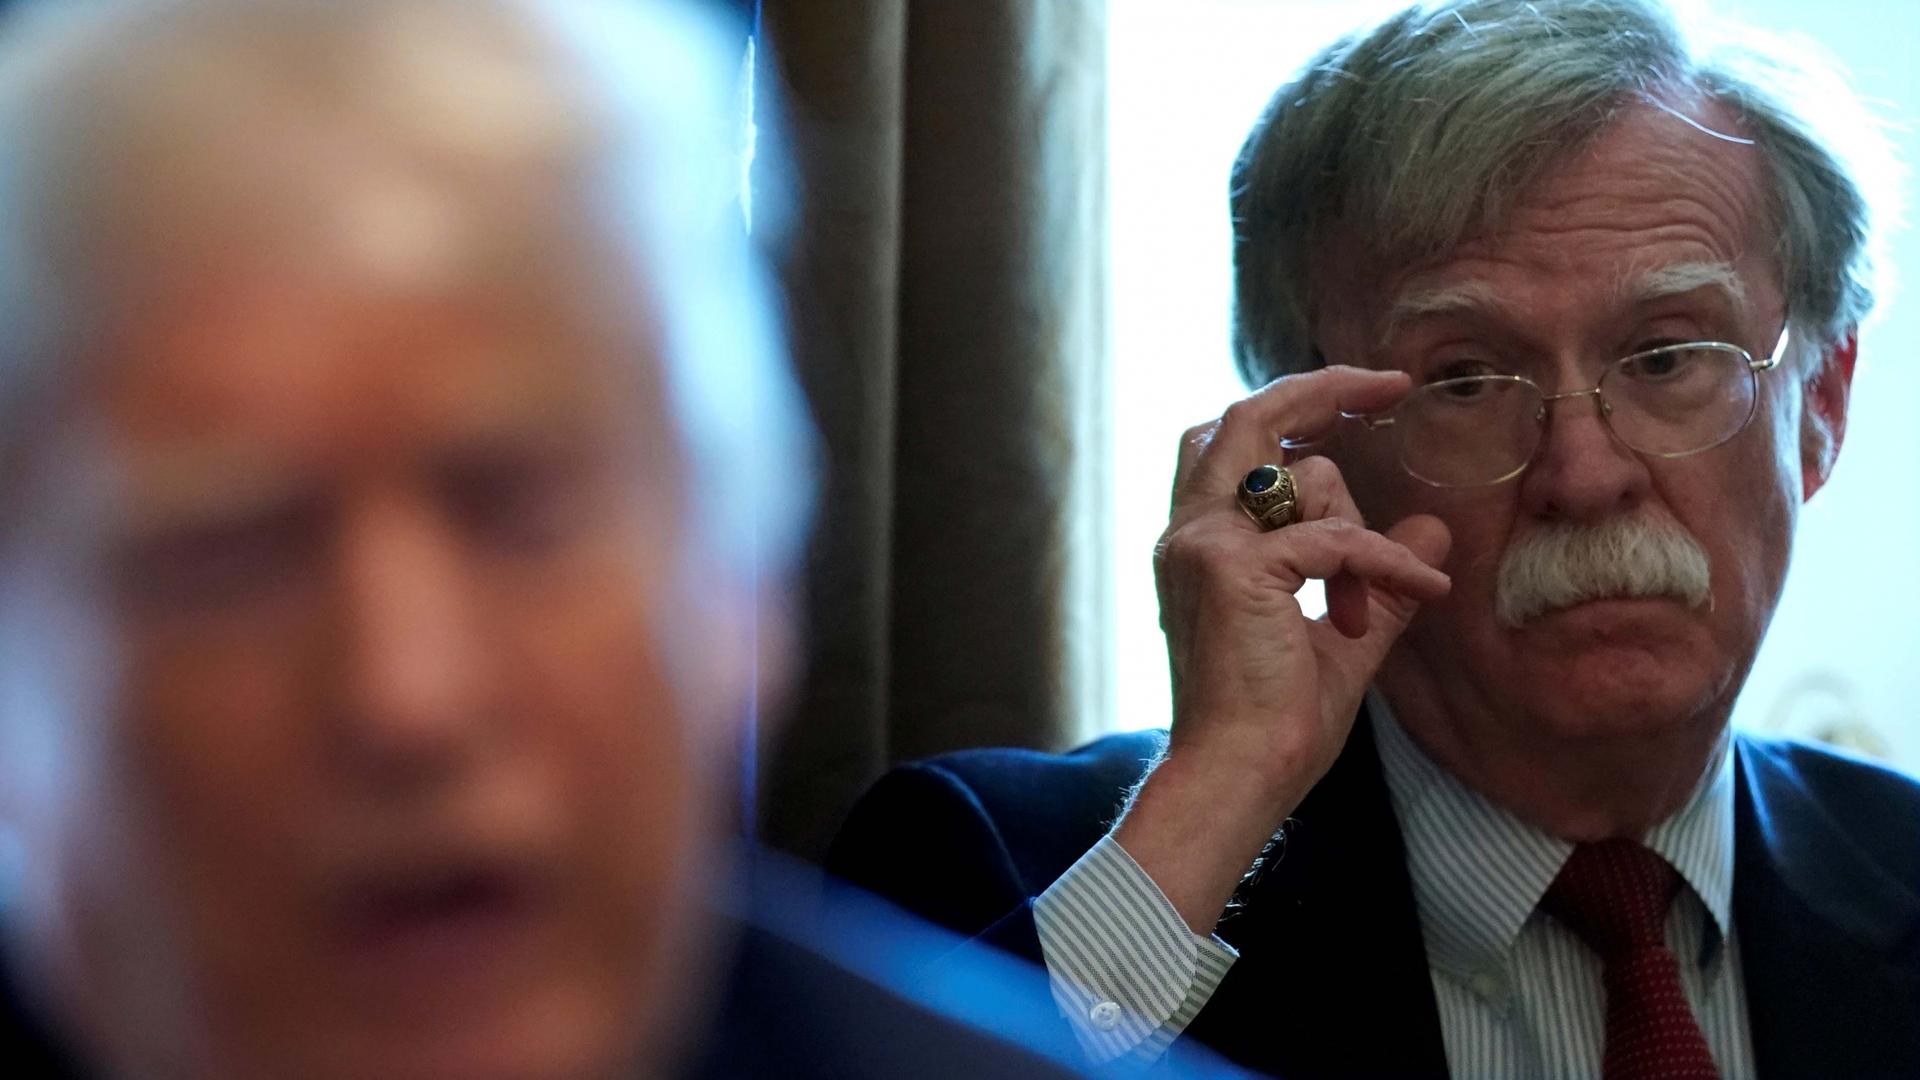 Then-National Security Adviser John Bolton listens as US President Donald Trump holds a Cabinet meeting at the White House in Washington, DC, on April 9, 2018.